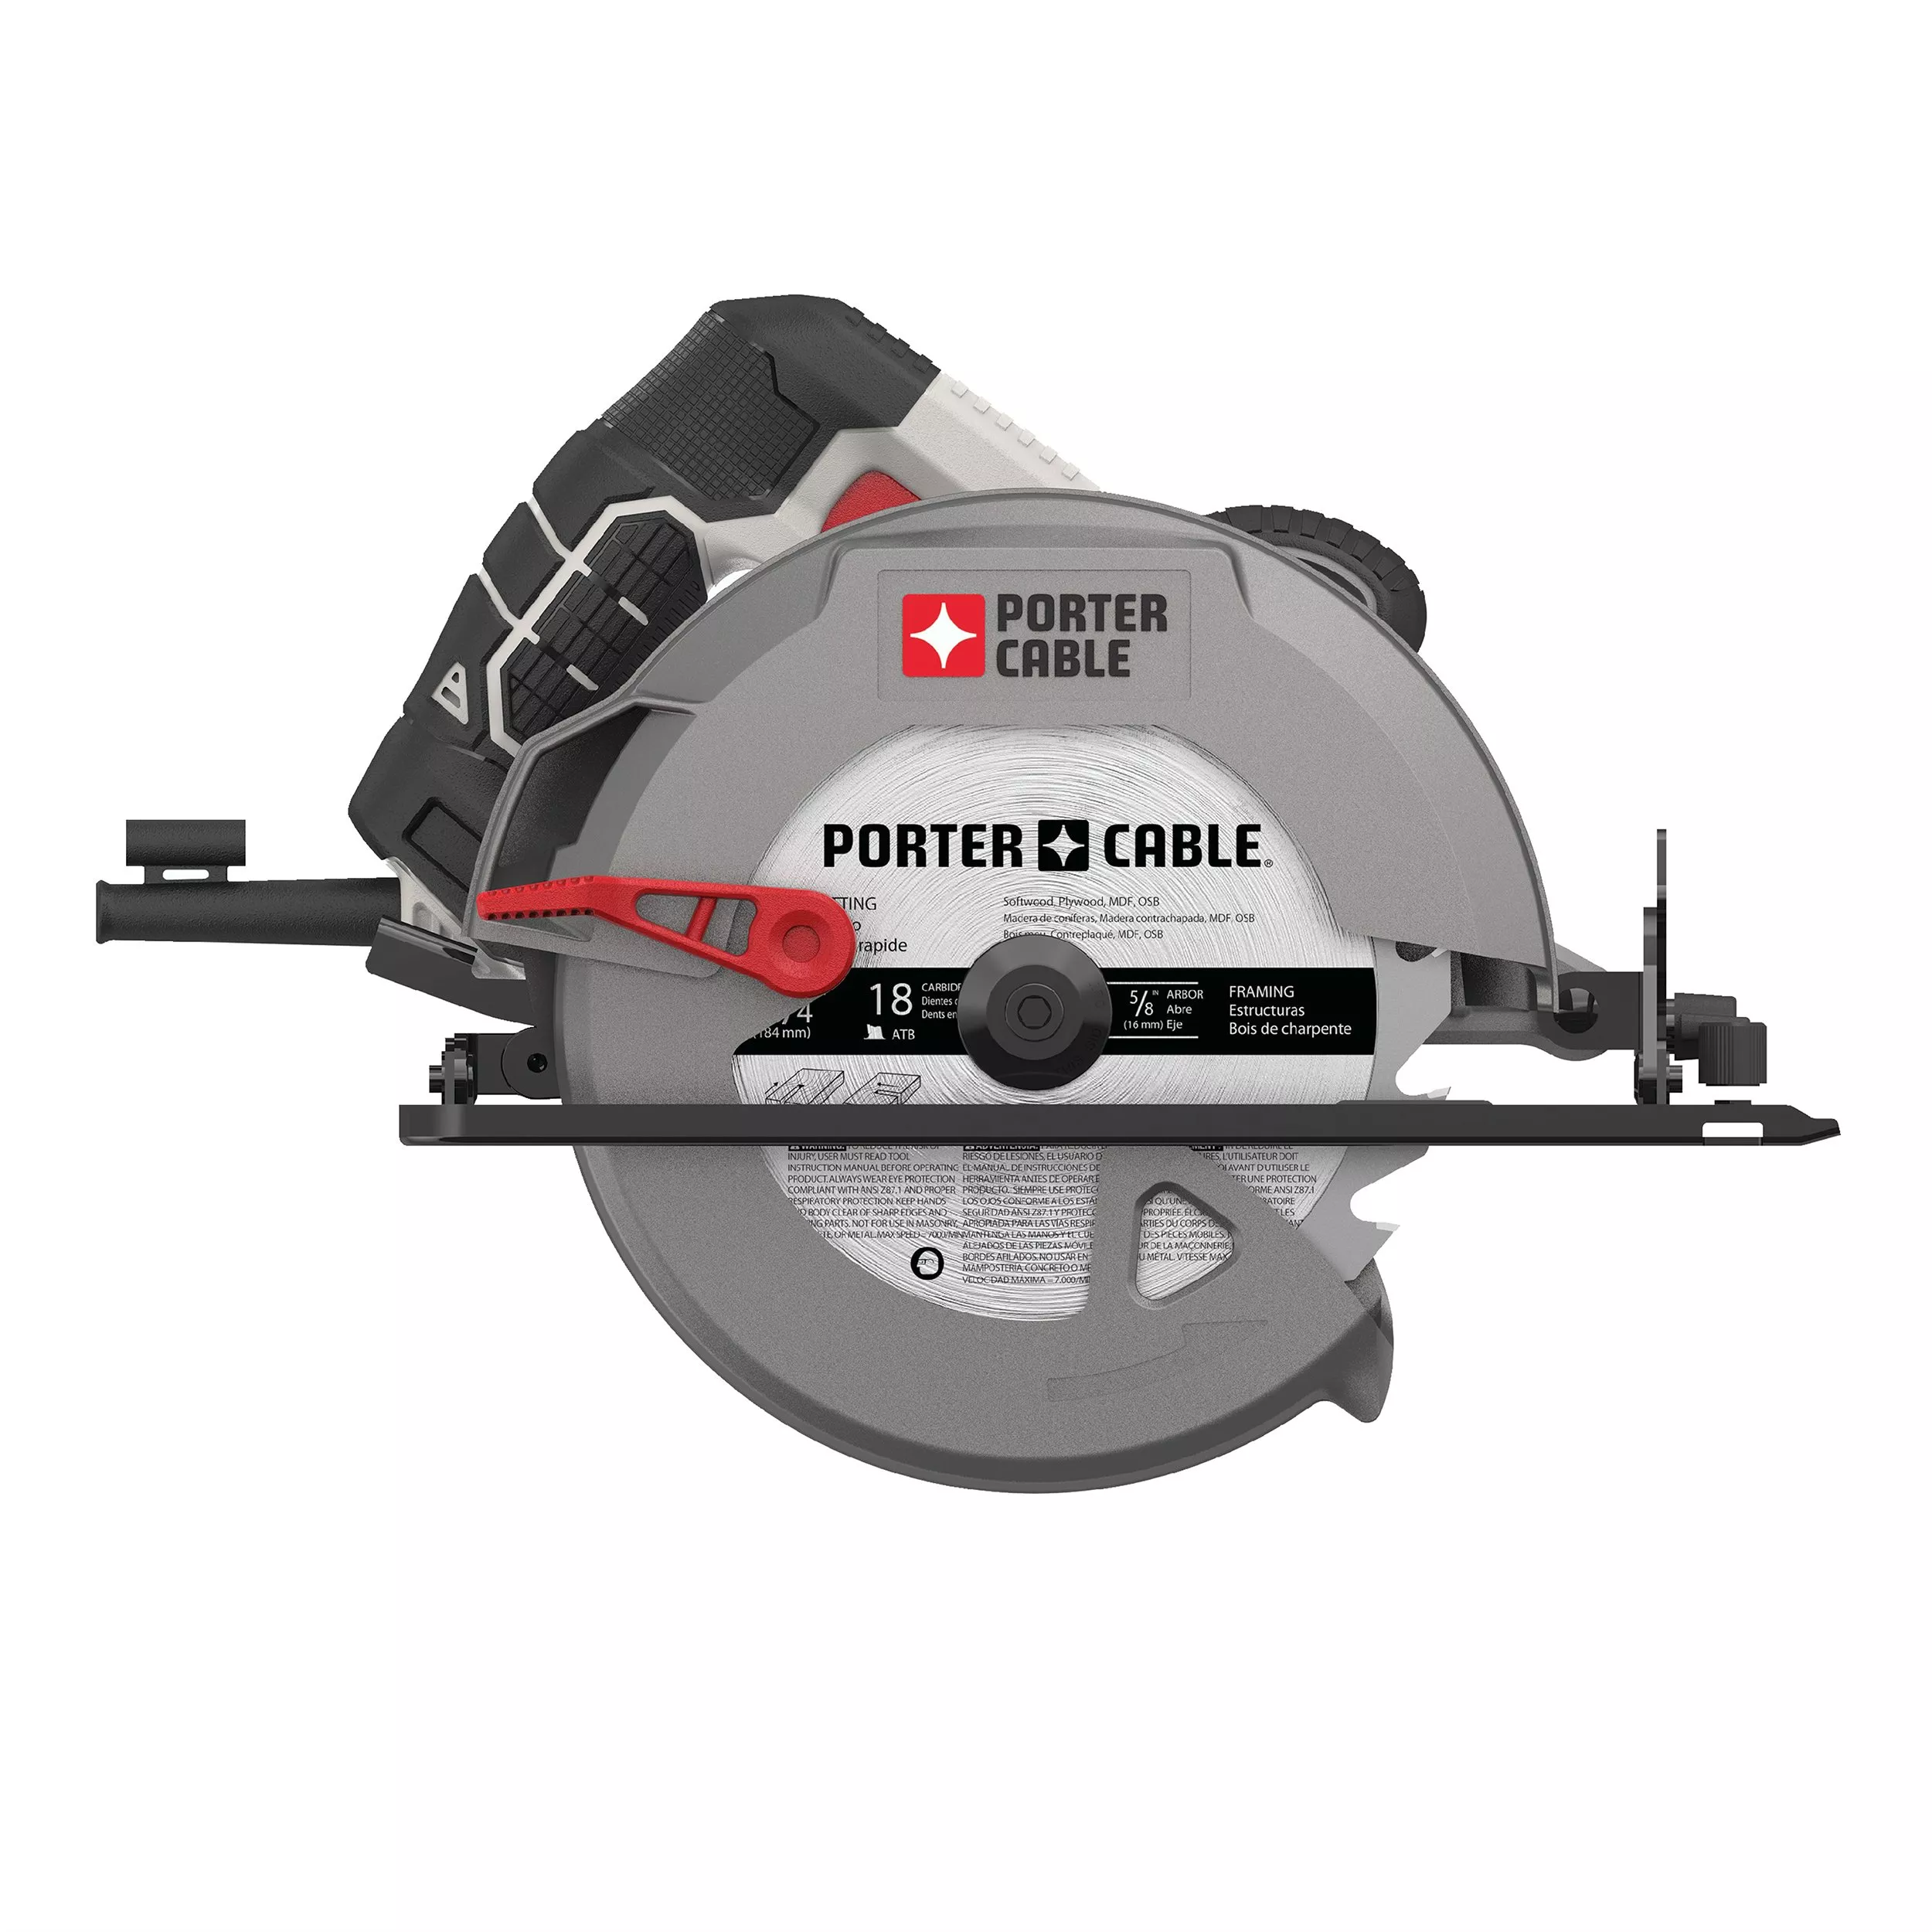 Porter Cable 15-Amp Corded Circular Saw